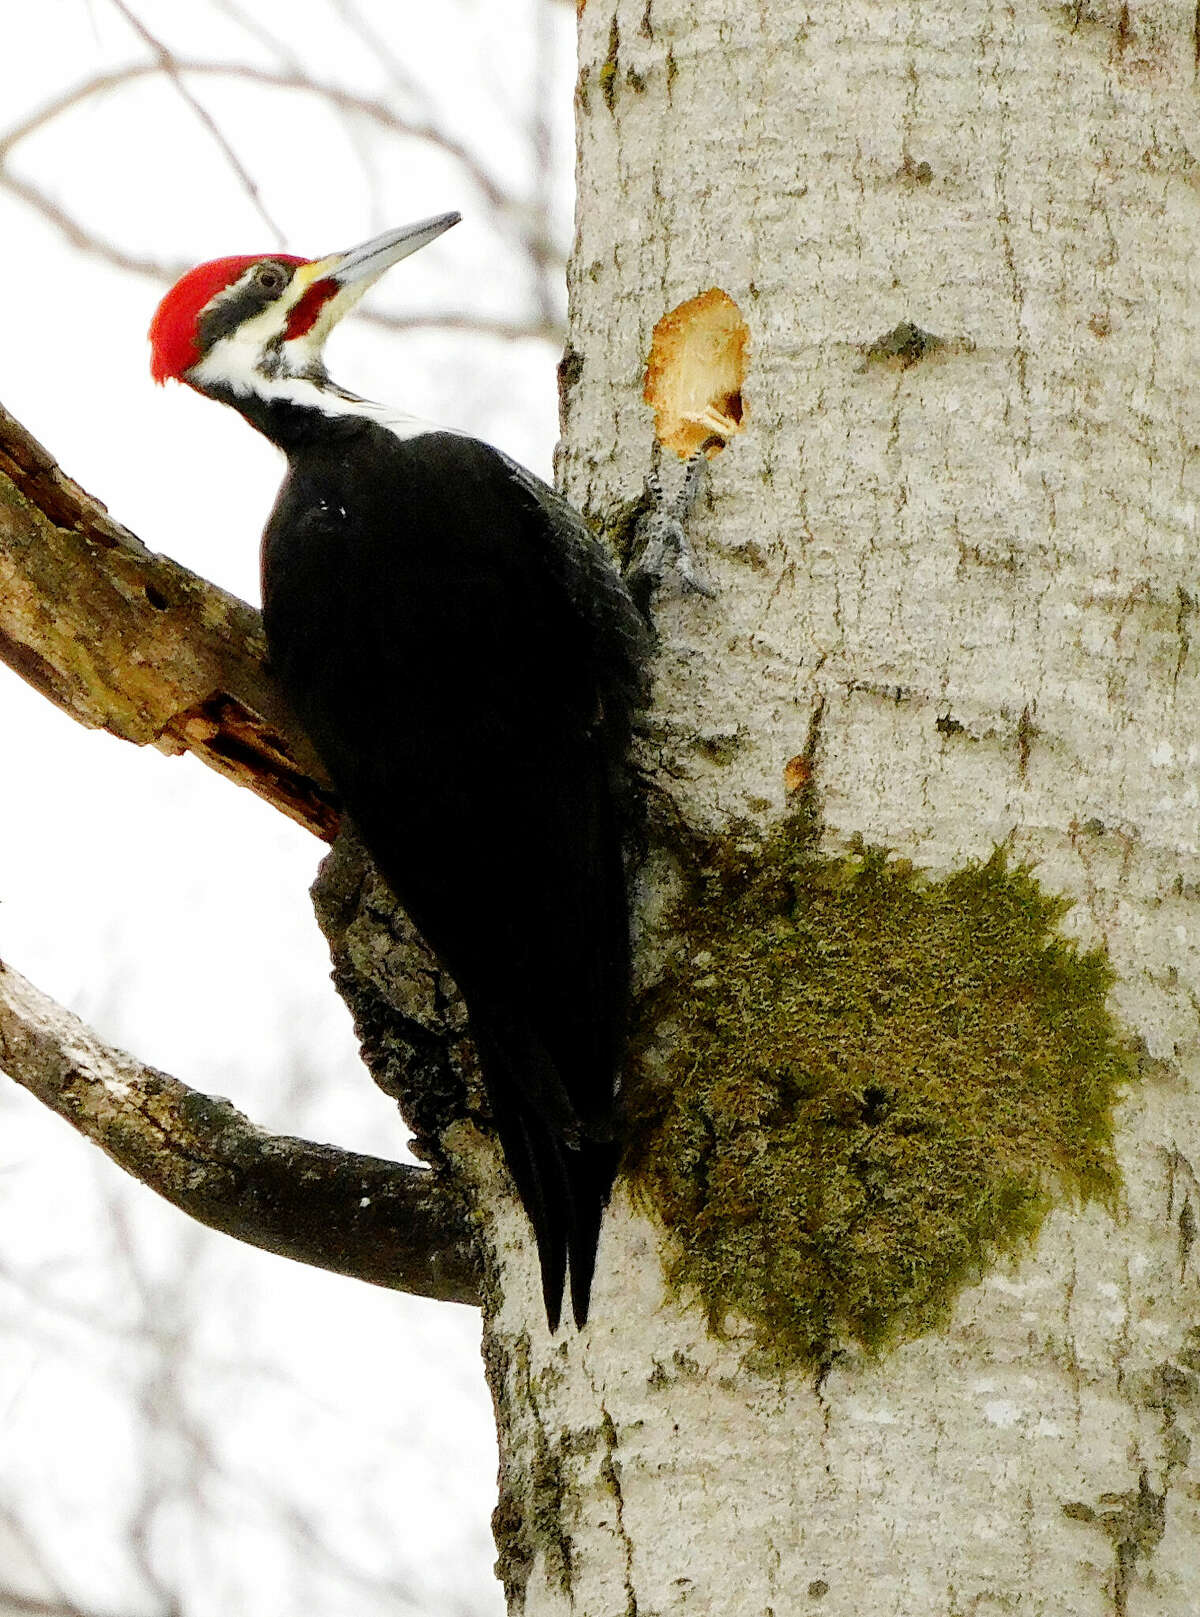 Pileated woodpeckers are our largest species of woodpecker. They look much like the now extinct Ivory-billed woodpecker, which is the woodpecker after which the cartoon character "Woody Woodpecker" was named.